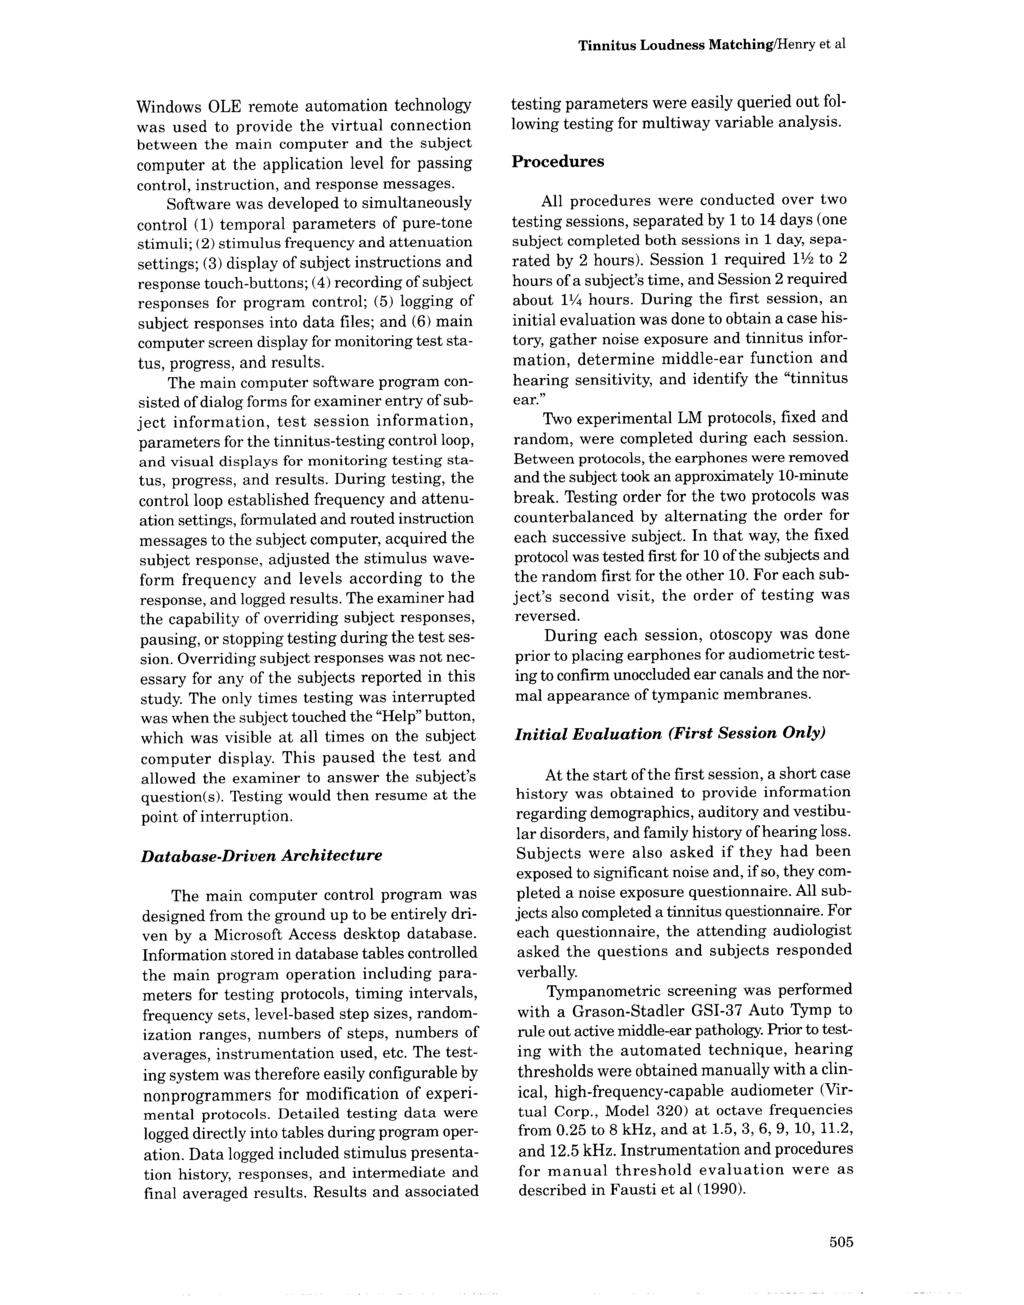 Tinnitus Loudness Matching/Henry et al Windows OLE remote automation technology was used to provide the virtual connection between the main computer and the subject computer at the application level